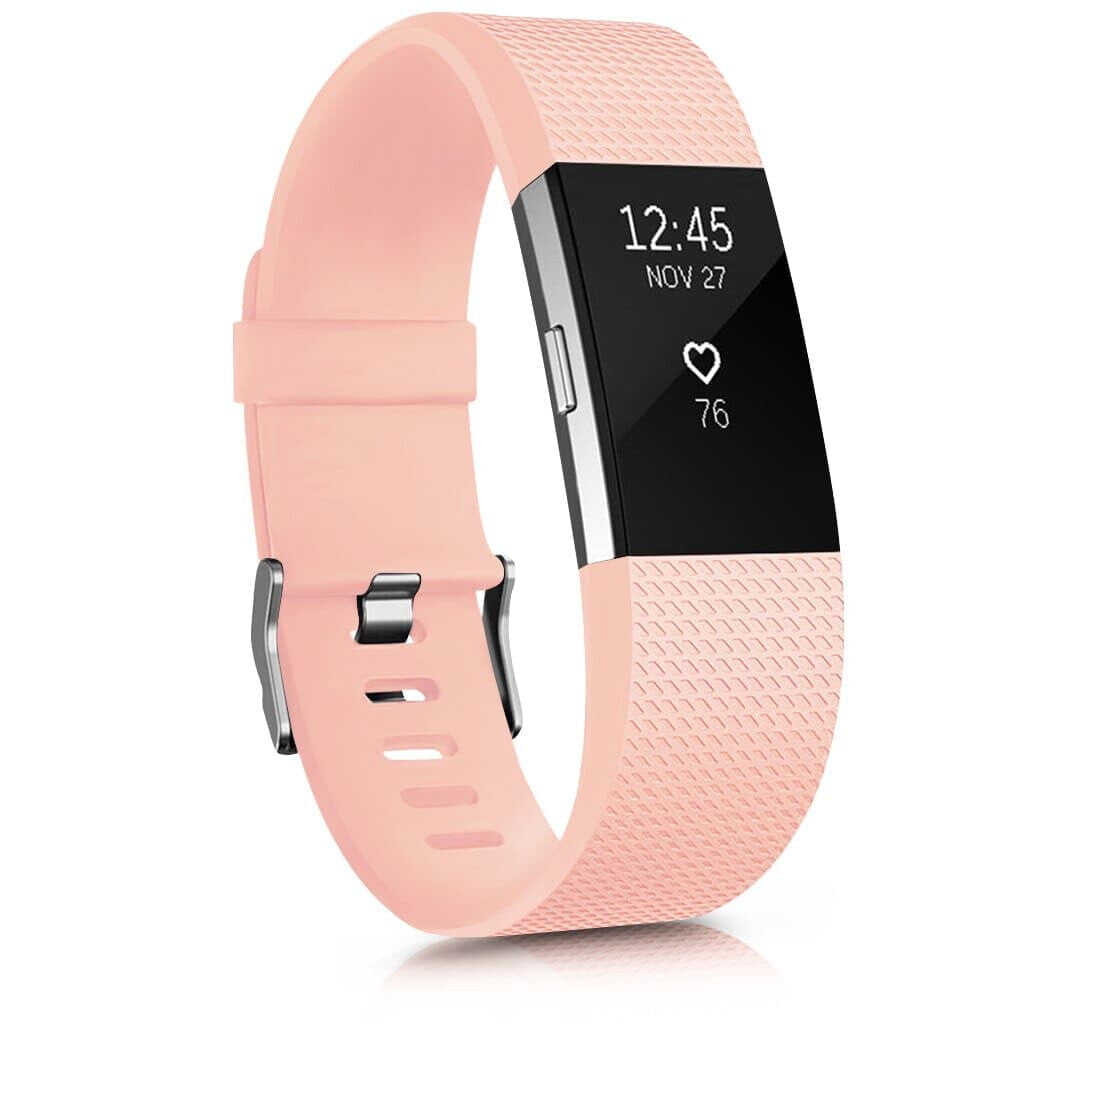 Silikon Armband für Fitbit Charge 2 - Pink / S - Fitbit Armband